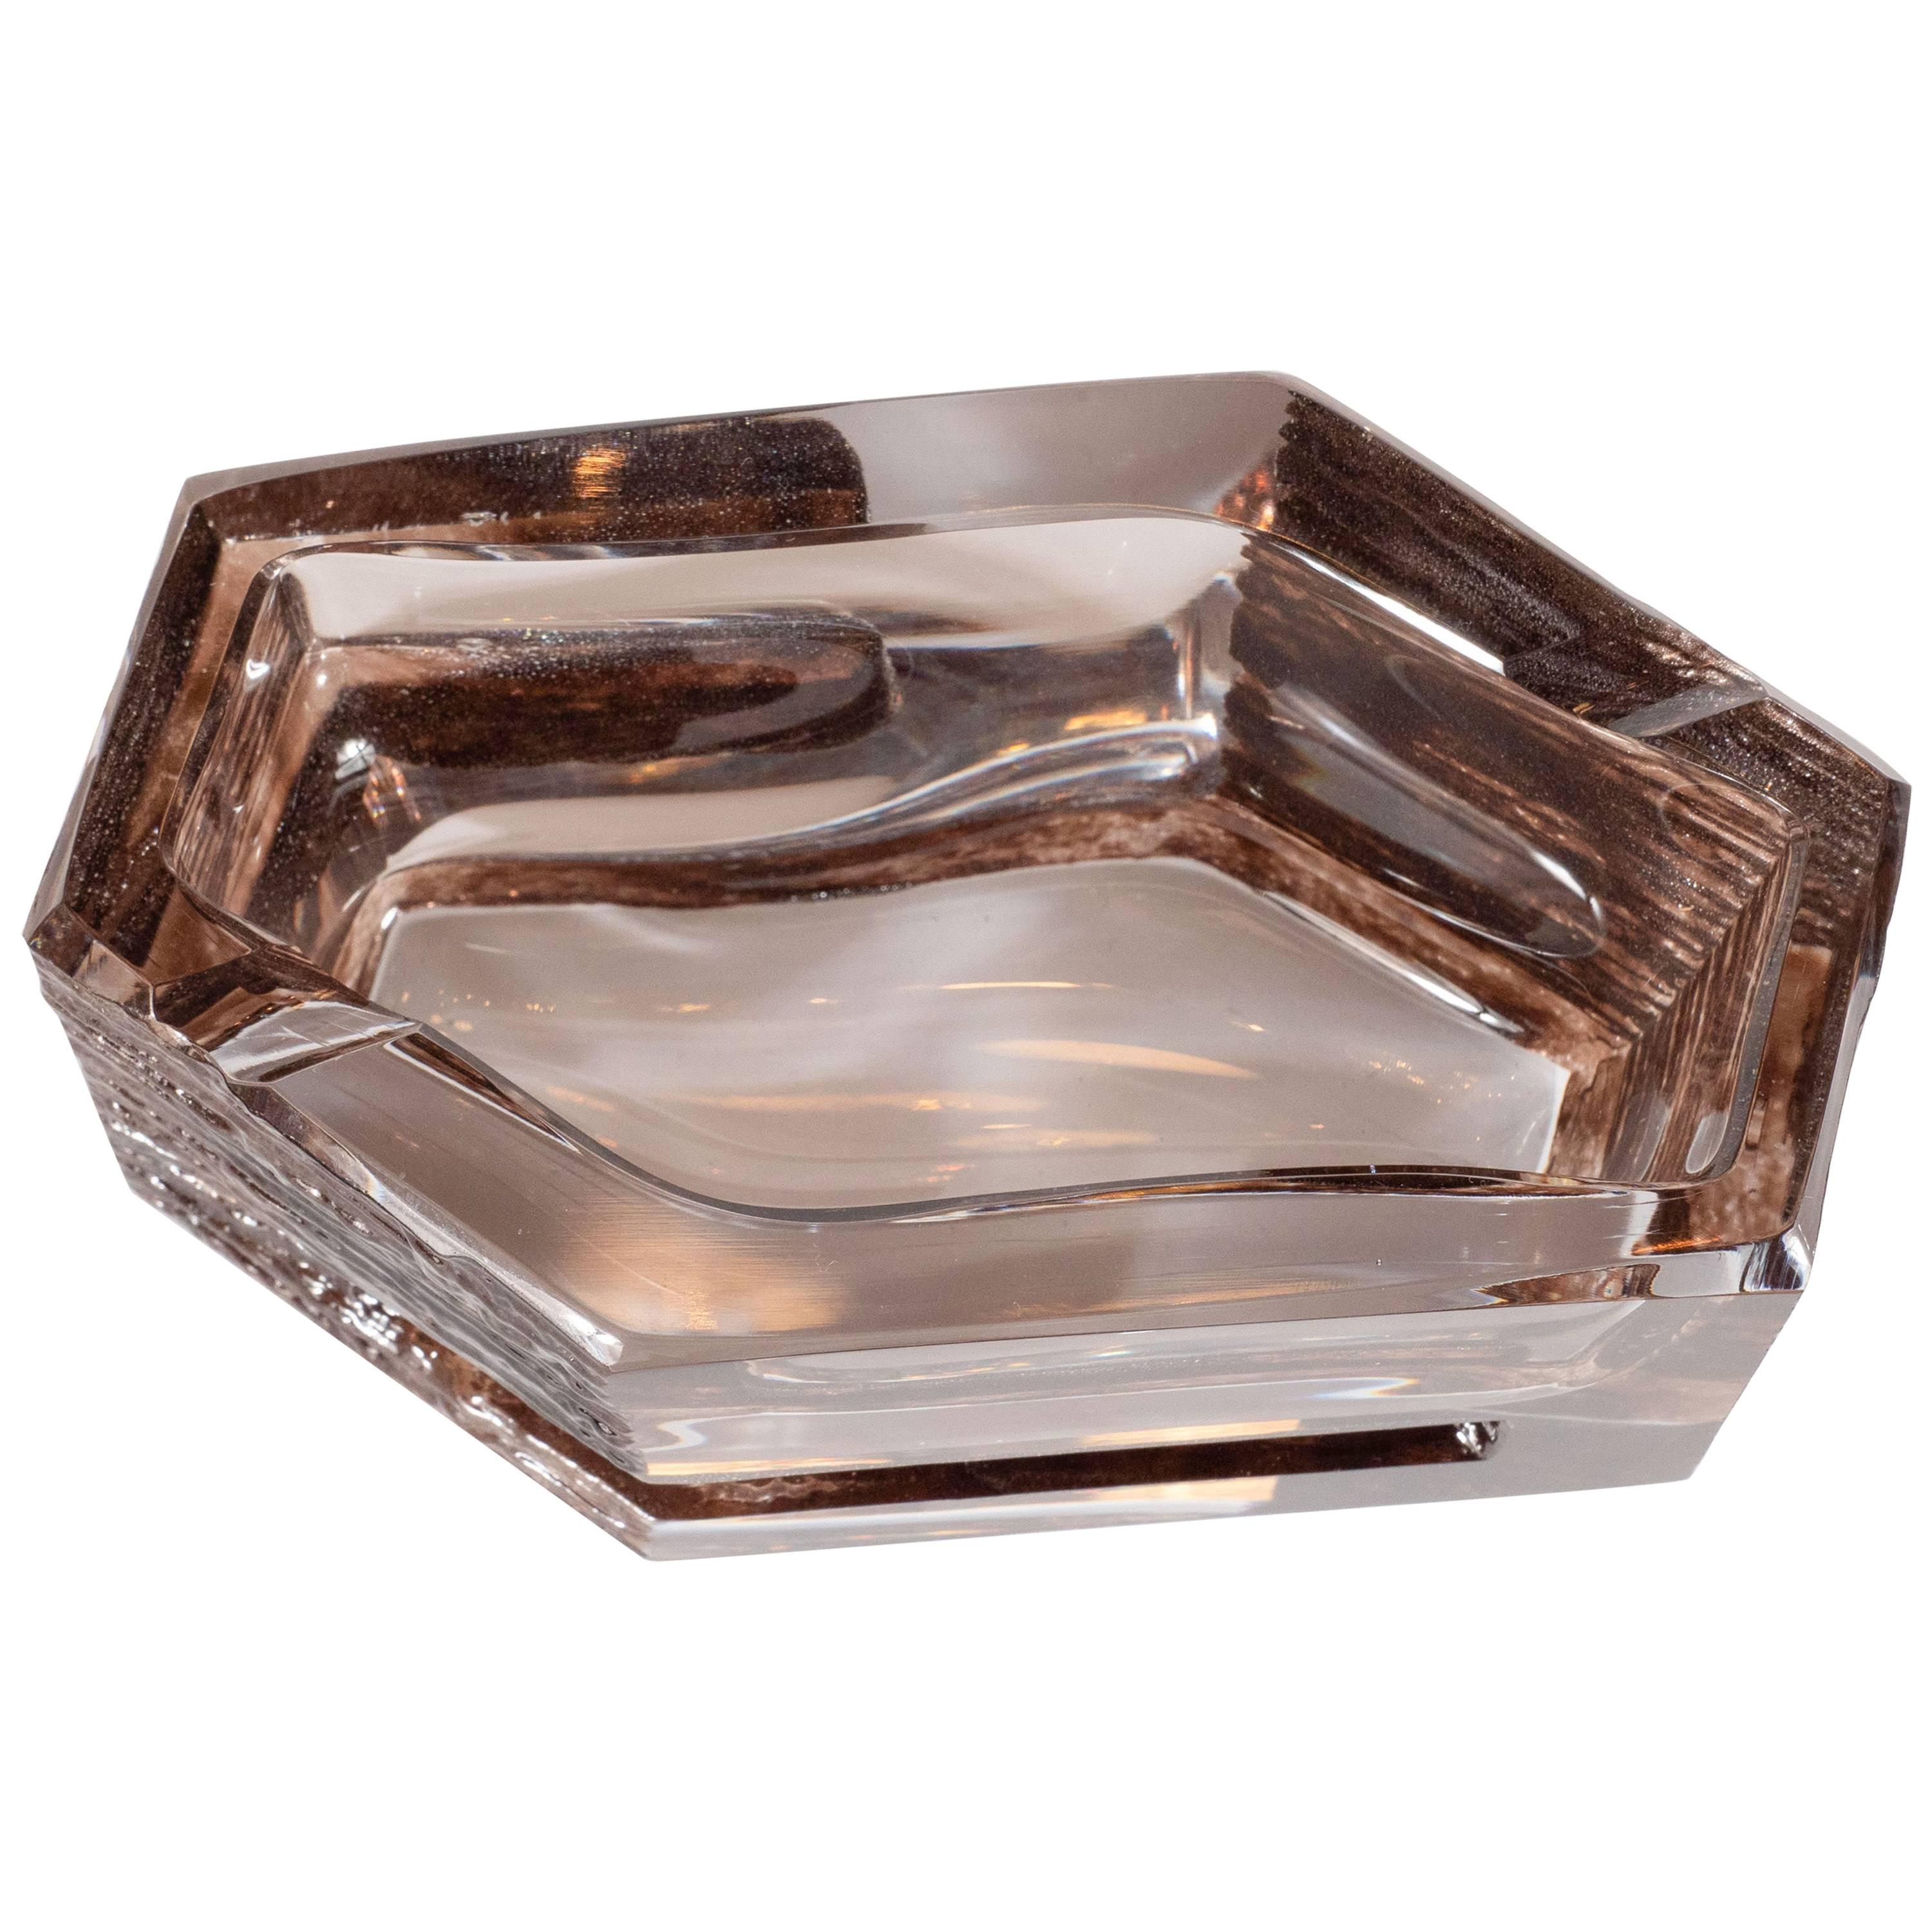 Mid-Century Modern Sculptural Hexagonal Smoked Glass Ashtray or Bowl by Daum